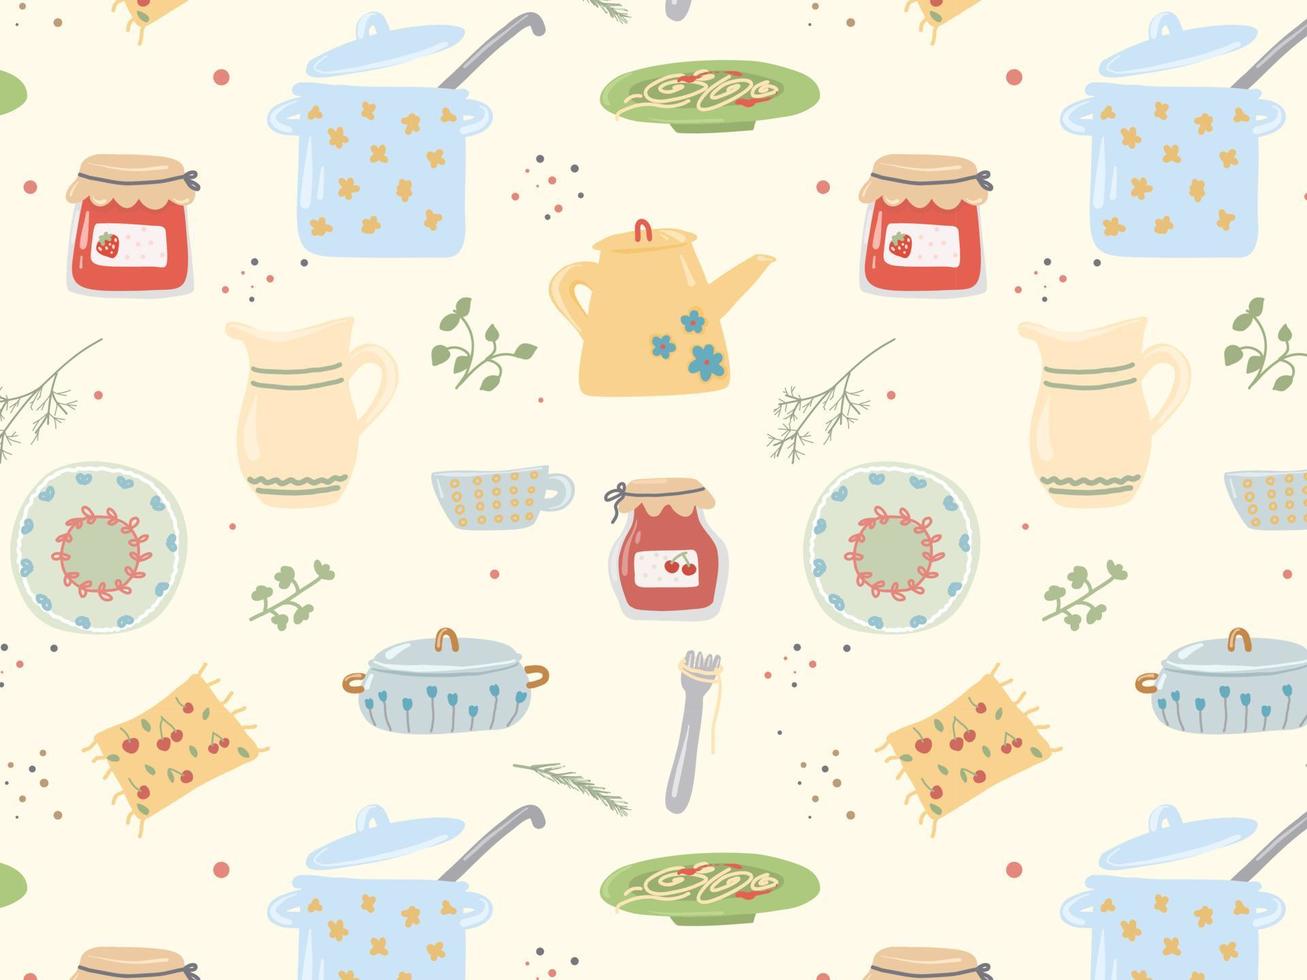 Cute pattern with crockery and kitchen utensils. Pot, plates, kettle. Pattern for kitchen textiles, wallpapers. vector